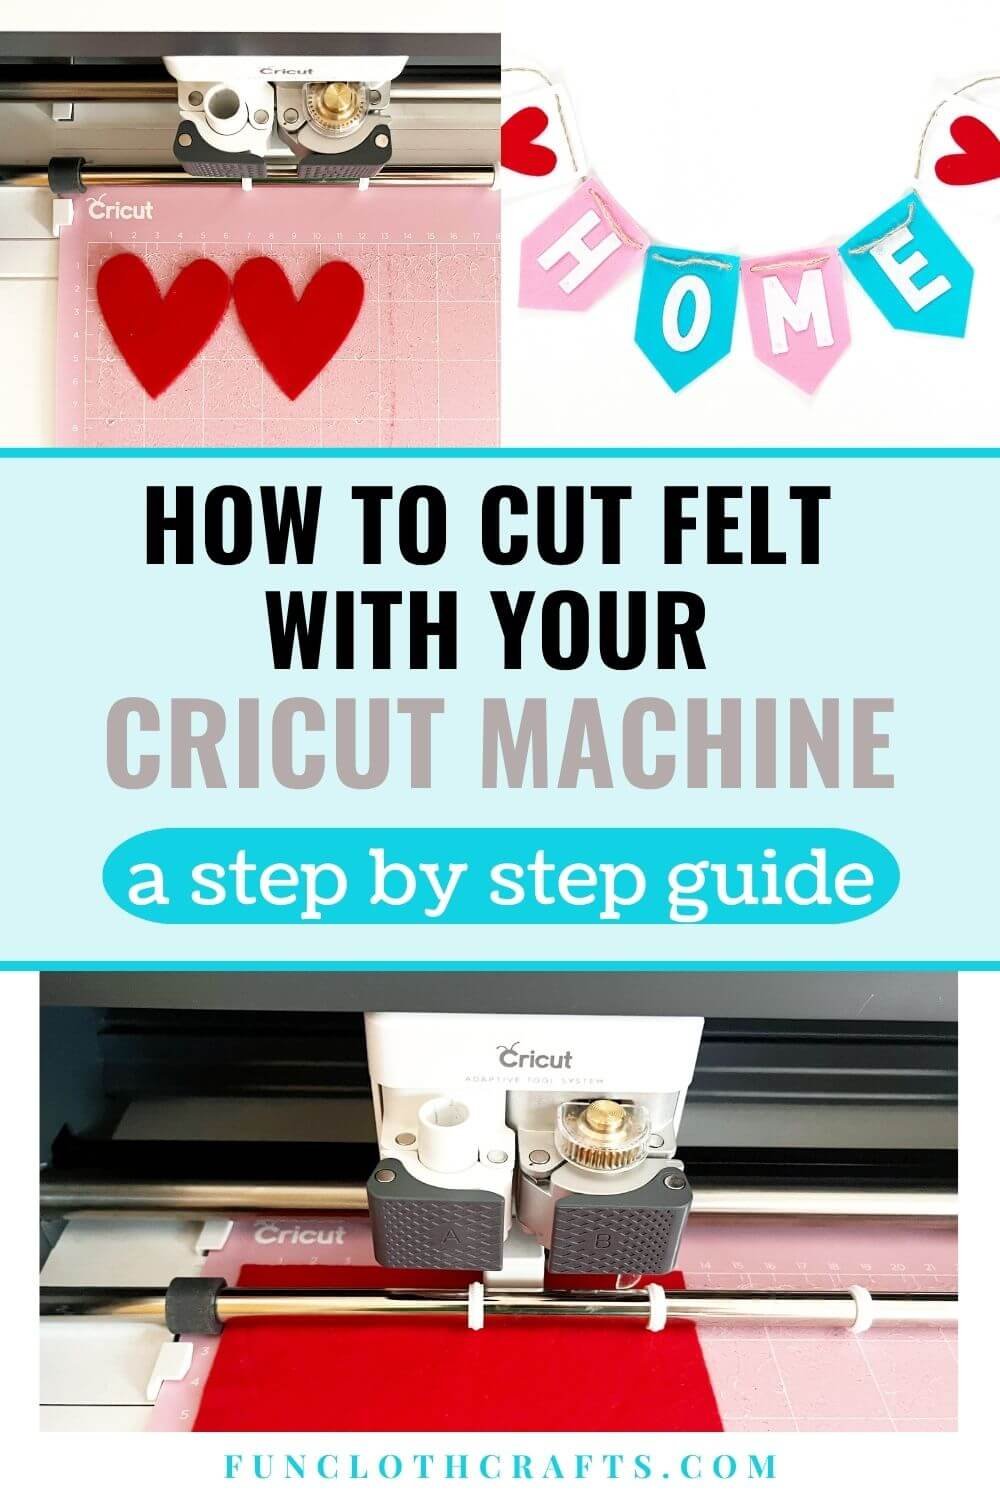 The Ultimate Guide to the Cricut Maker (What It Can Do & Why You